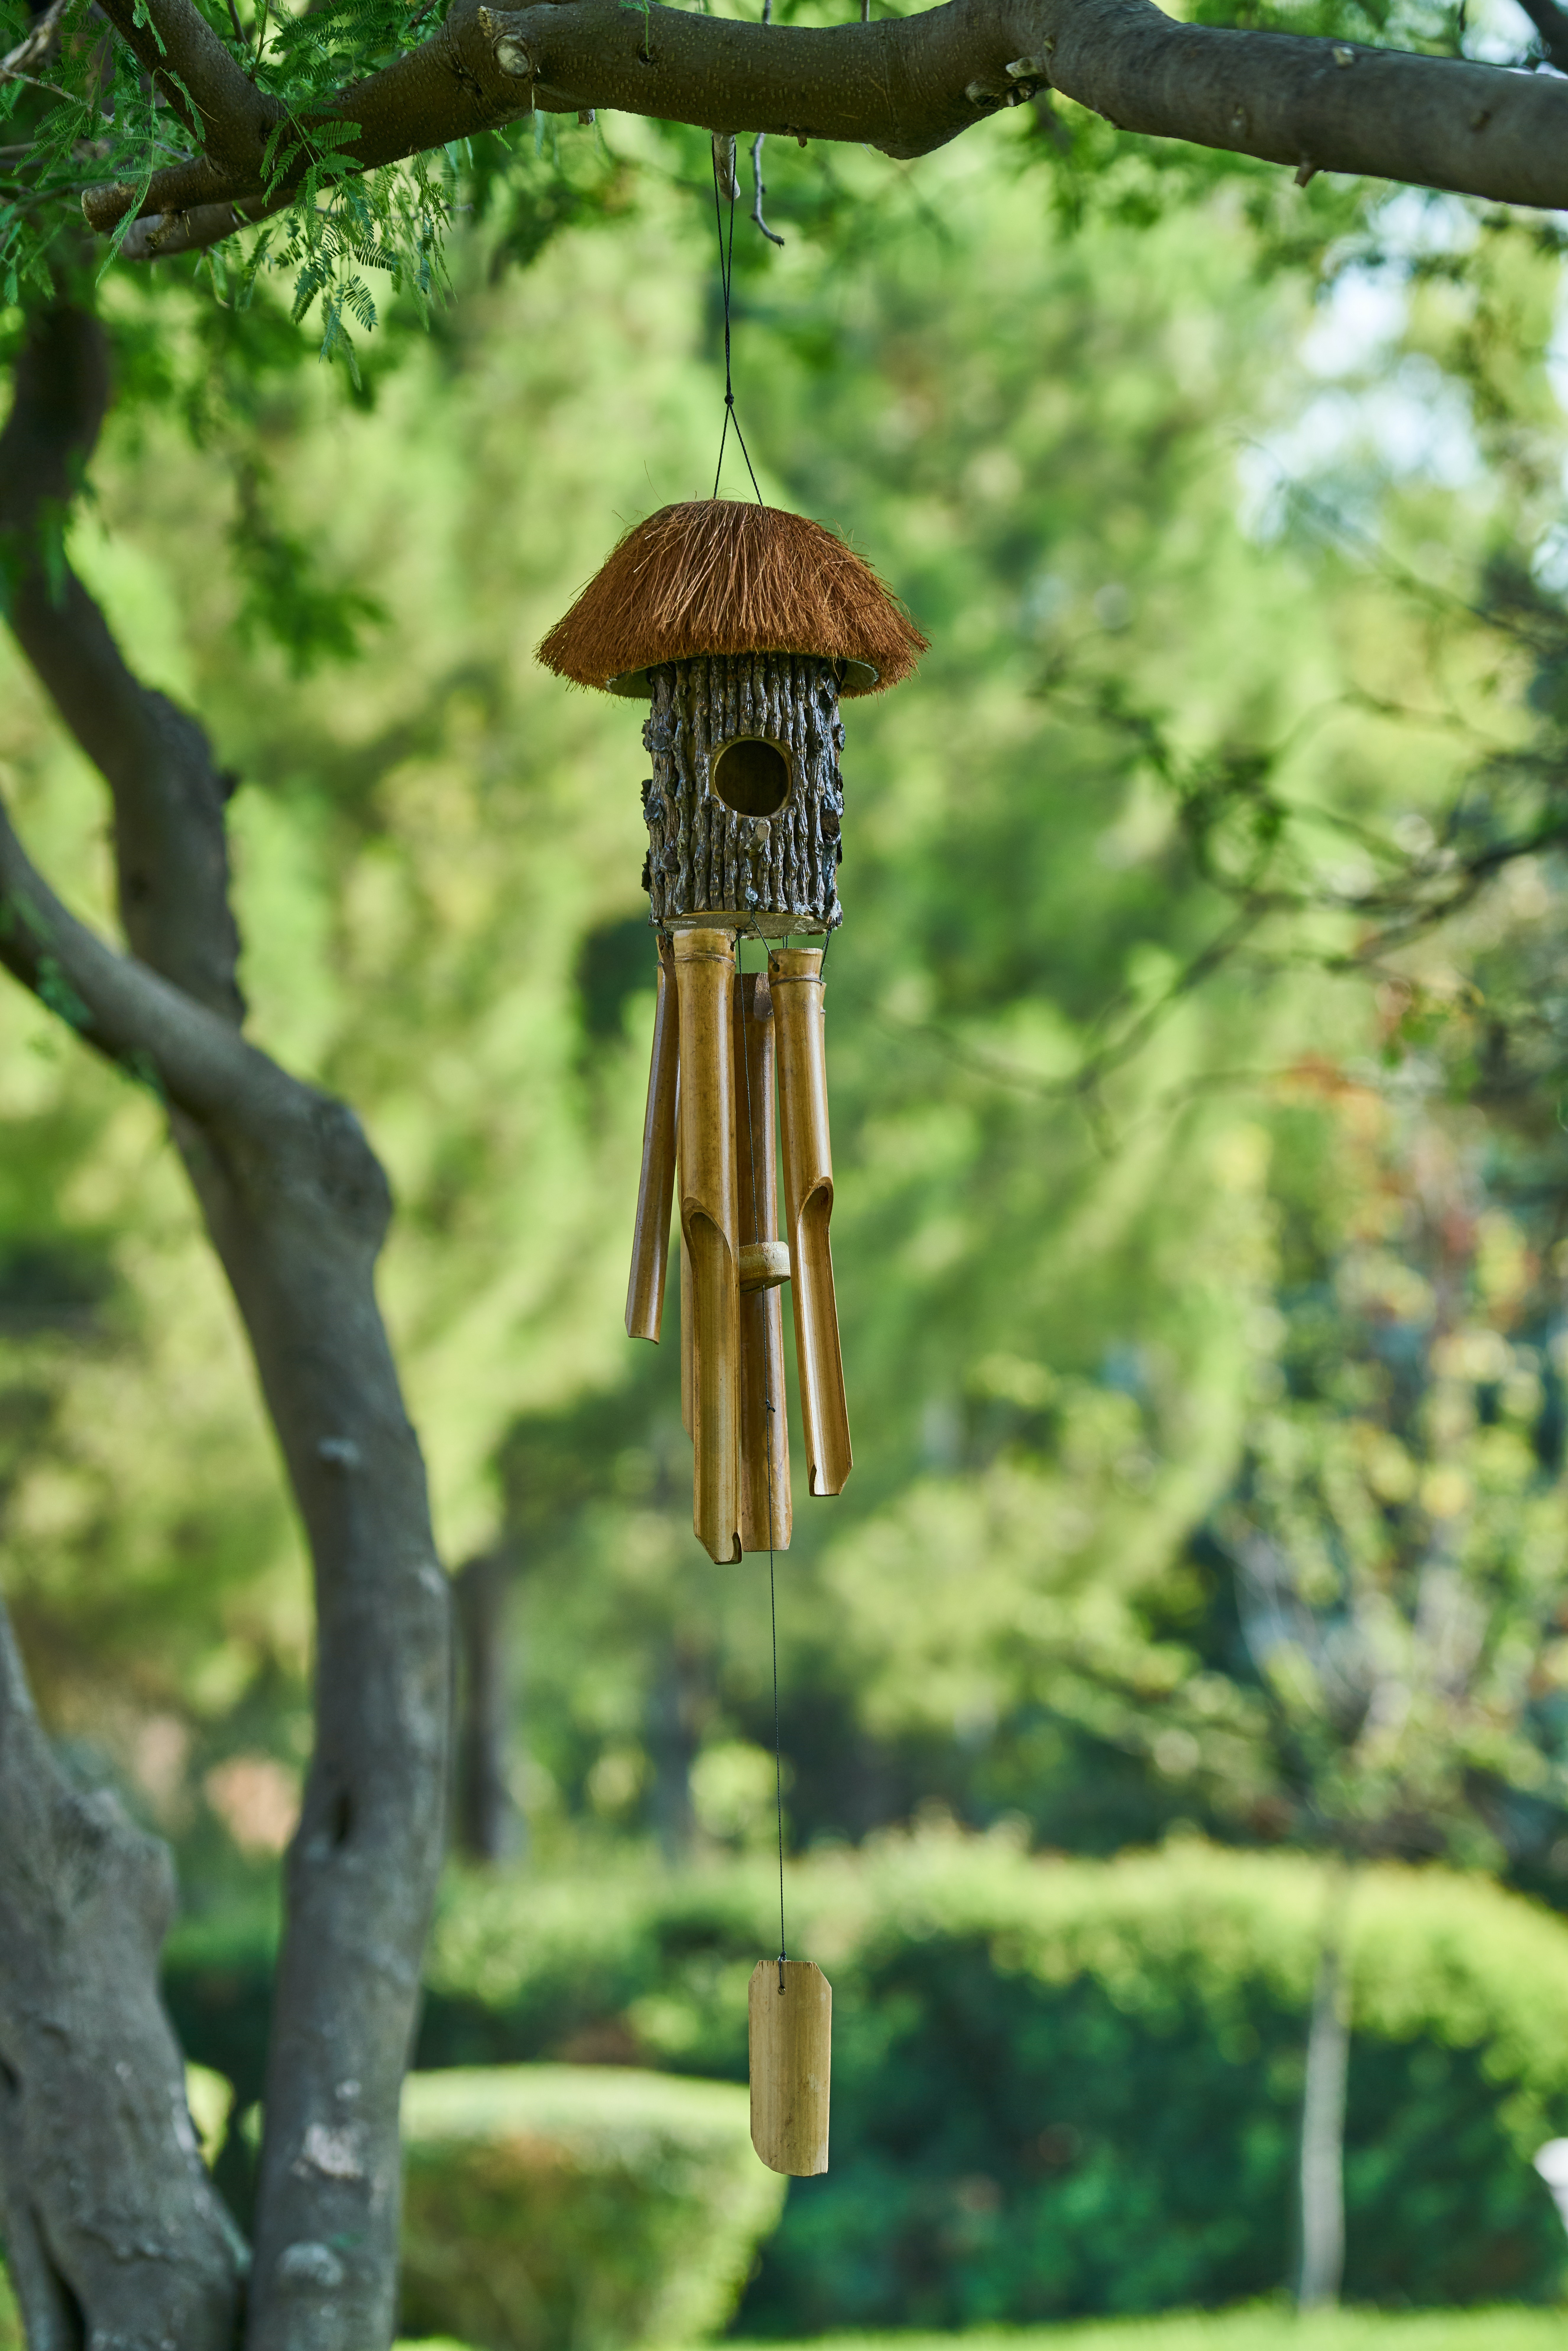 200+ Free Wind Chimes & Nature Images - Pixabay